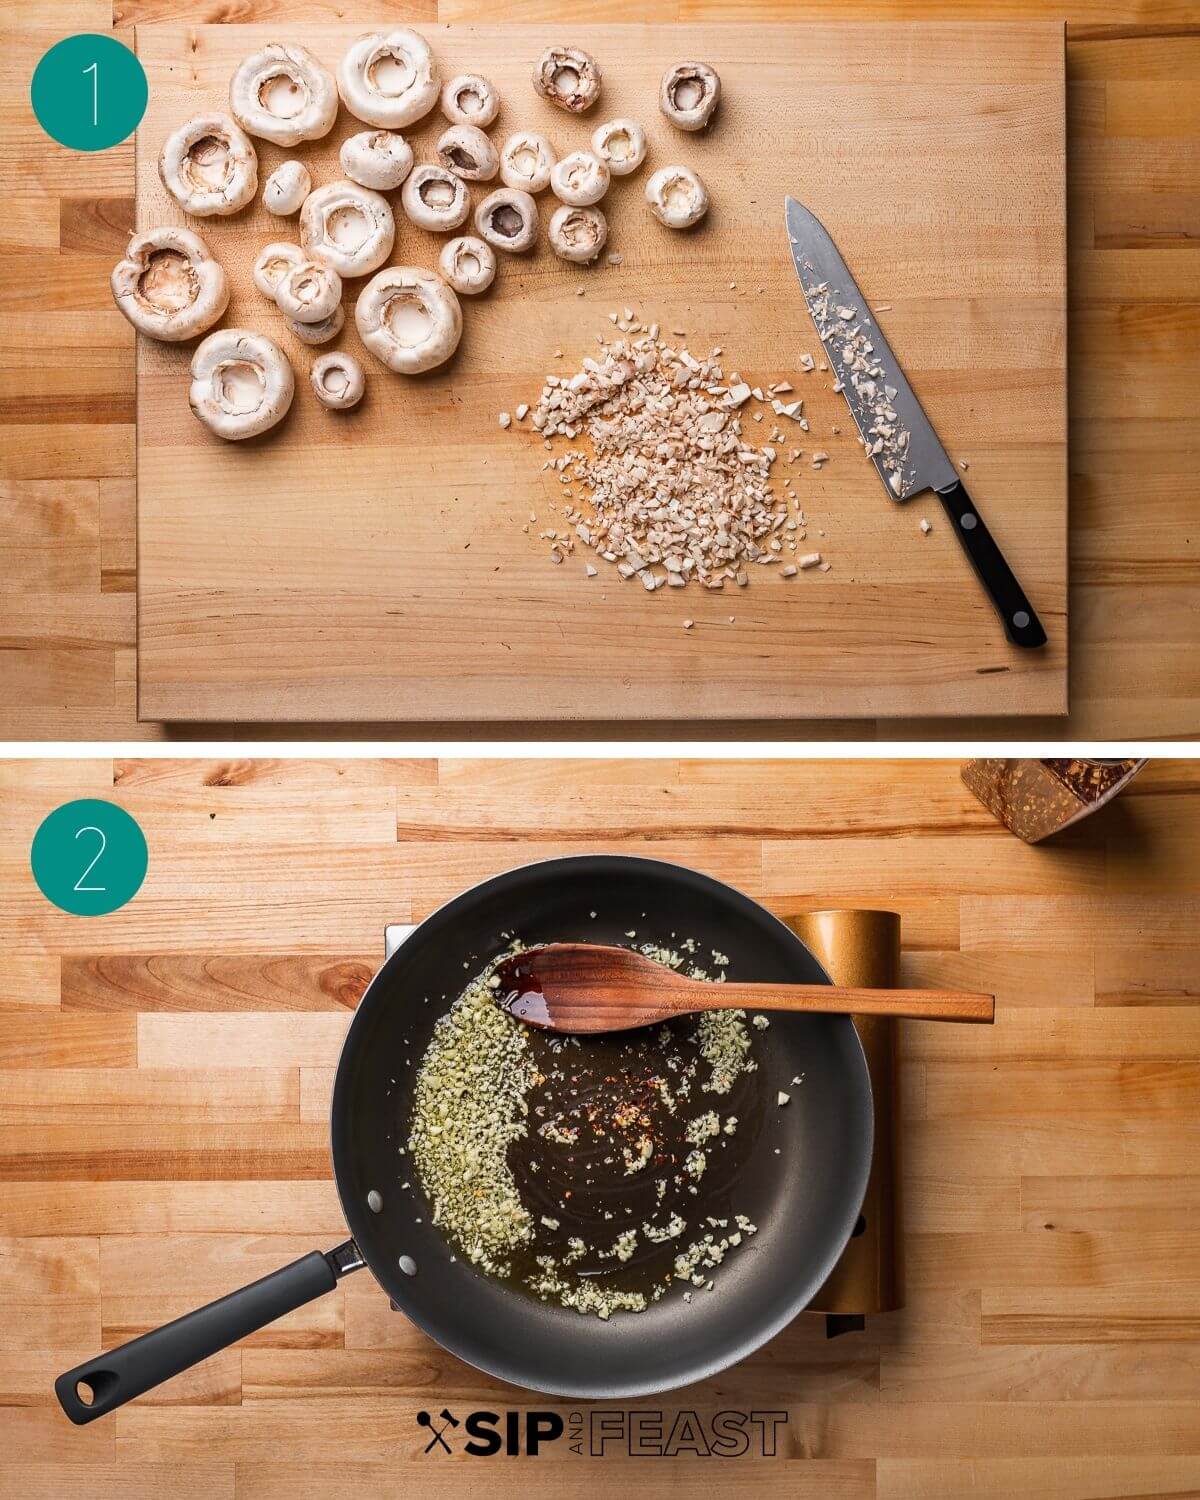 Italian stuffed mushrooms recipe process shot collage group number one showing mushrooms with stems chopped and a fry pan with butter.